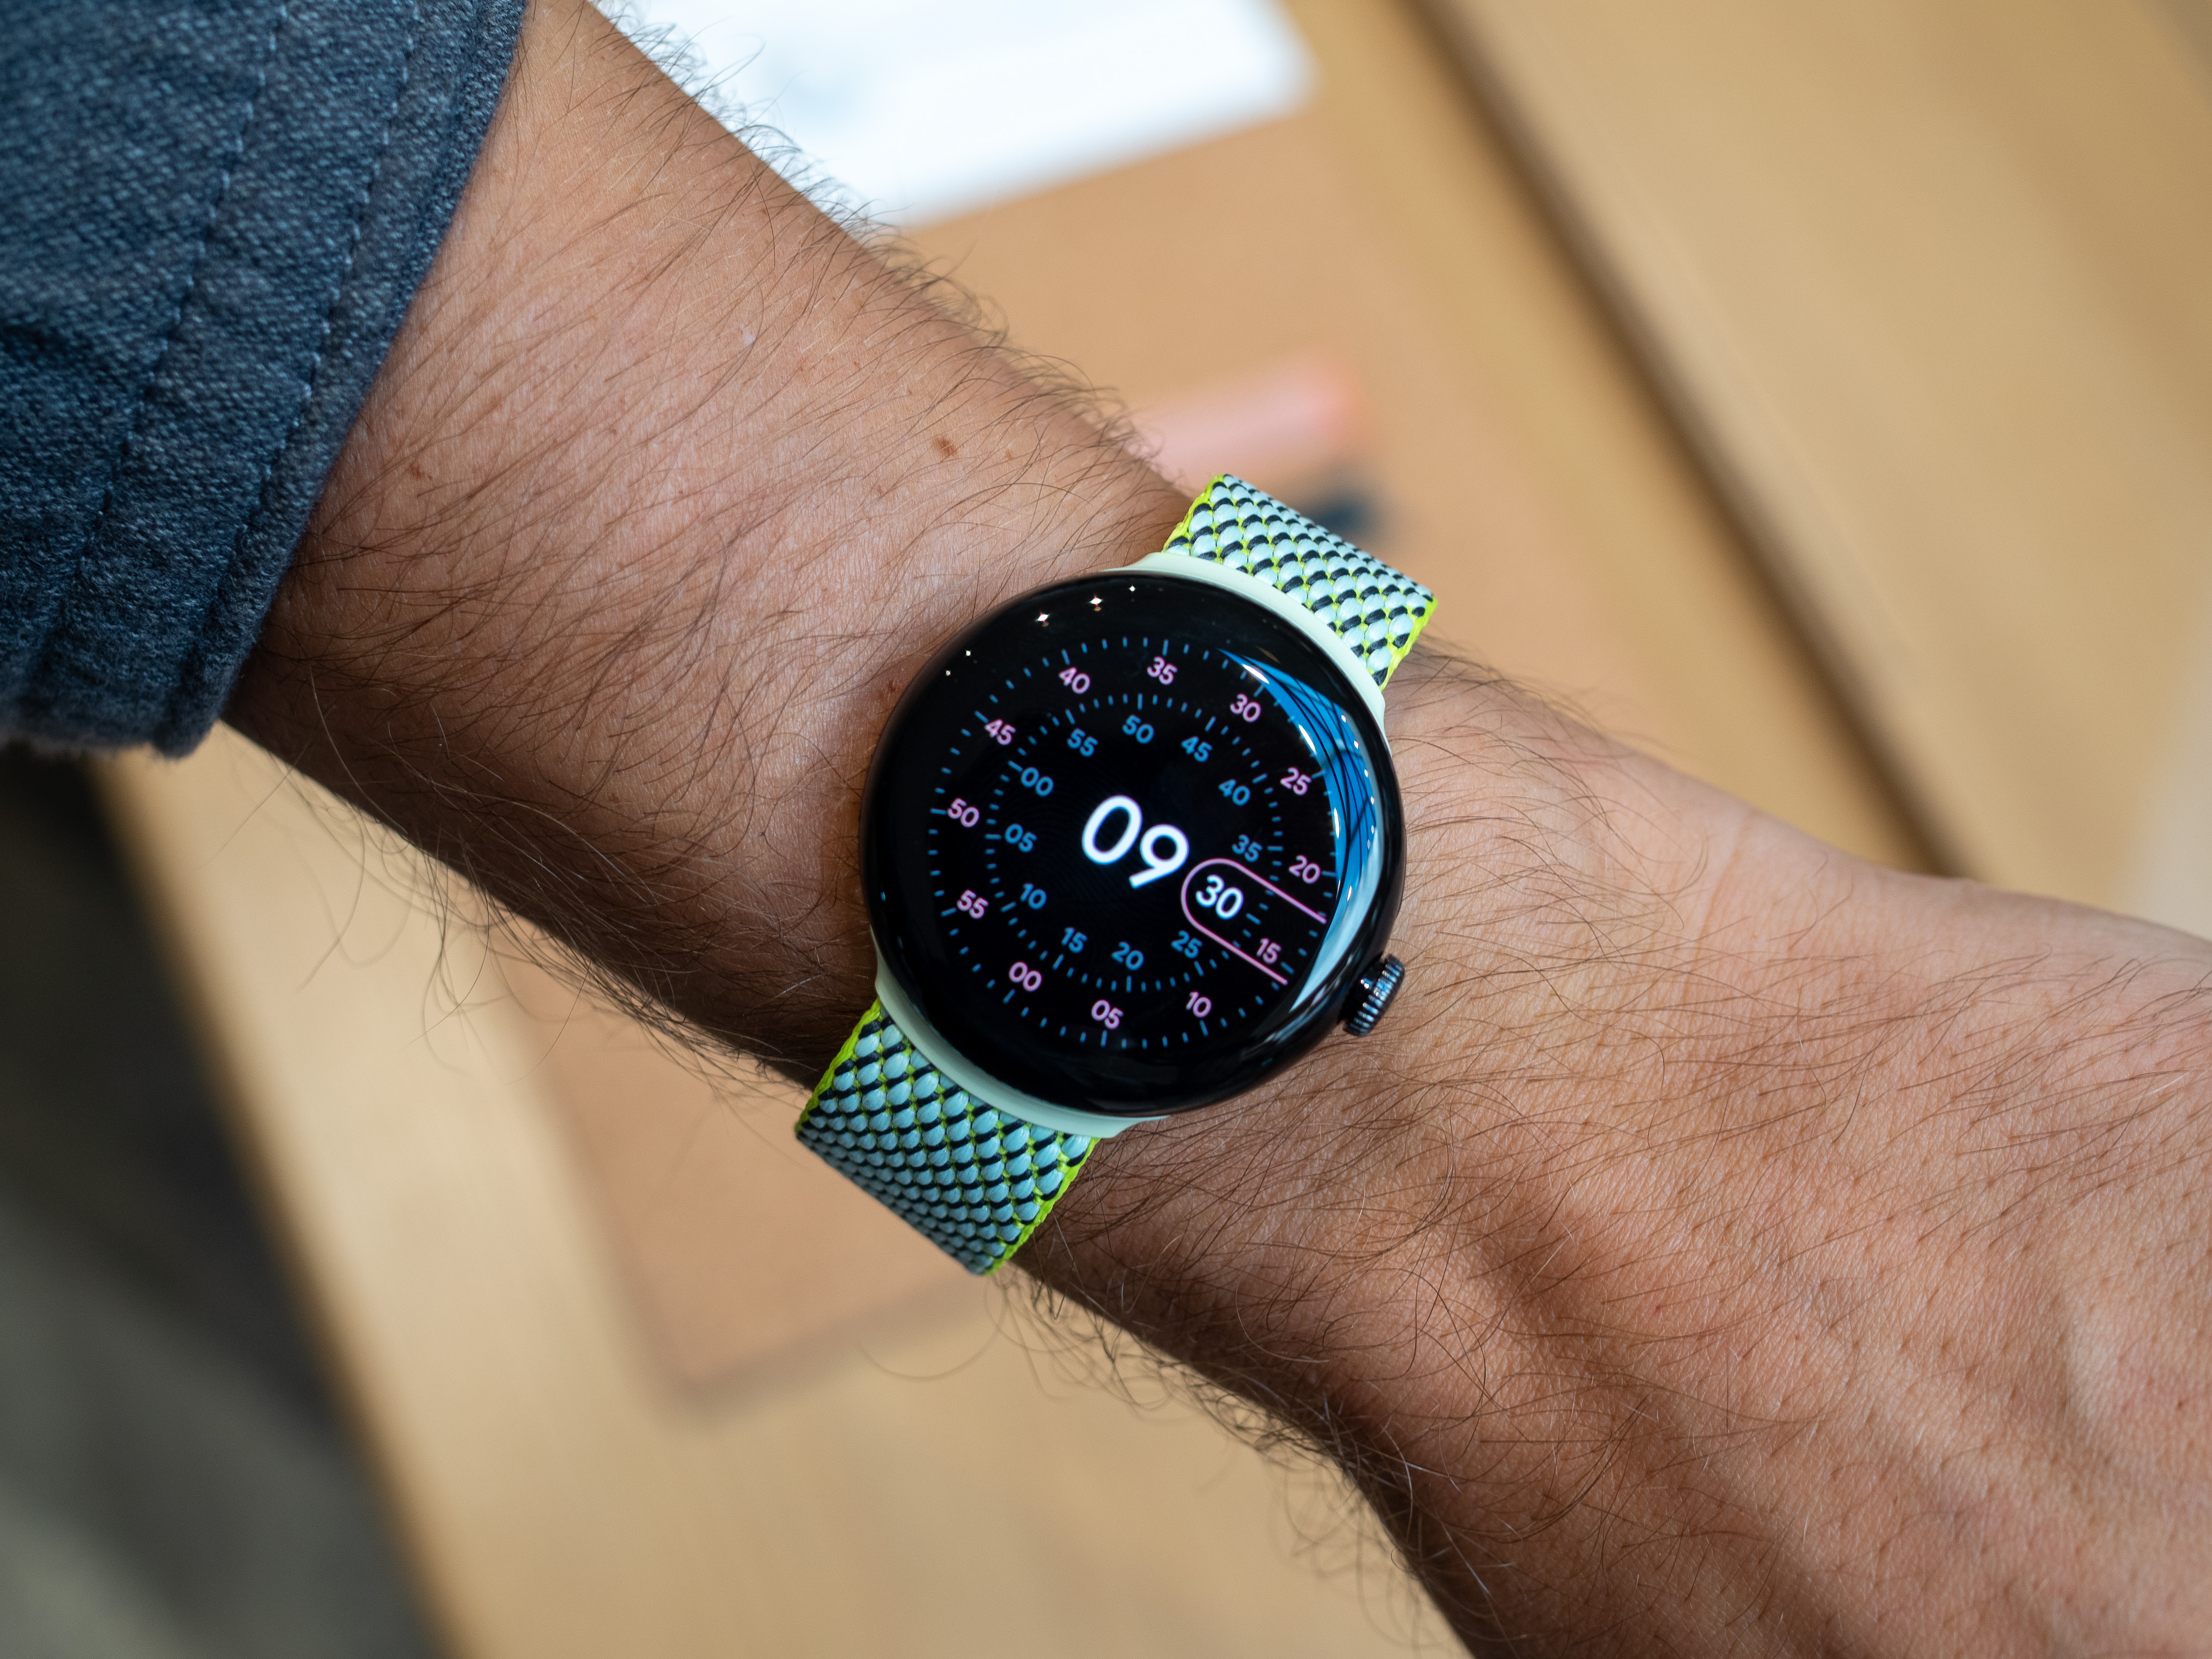 The Pixel Watch misses the one thing it needed to stand out